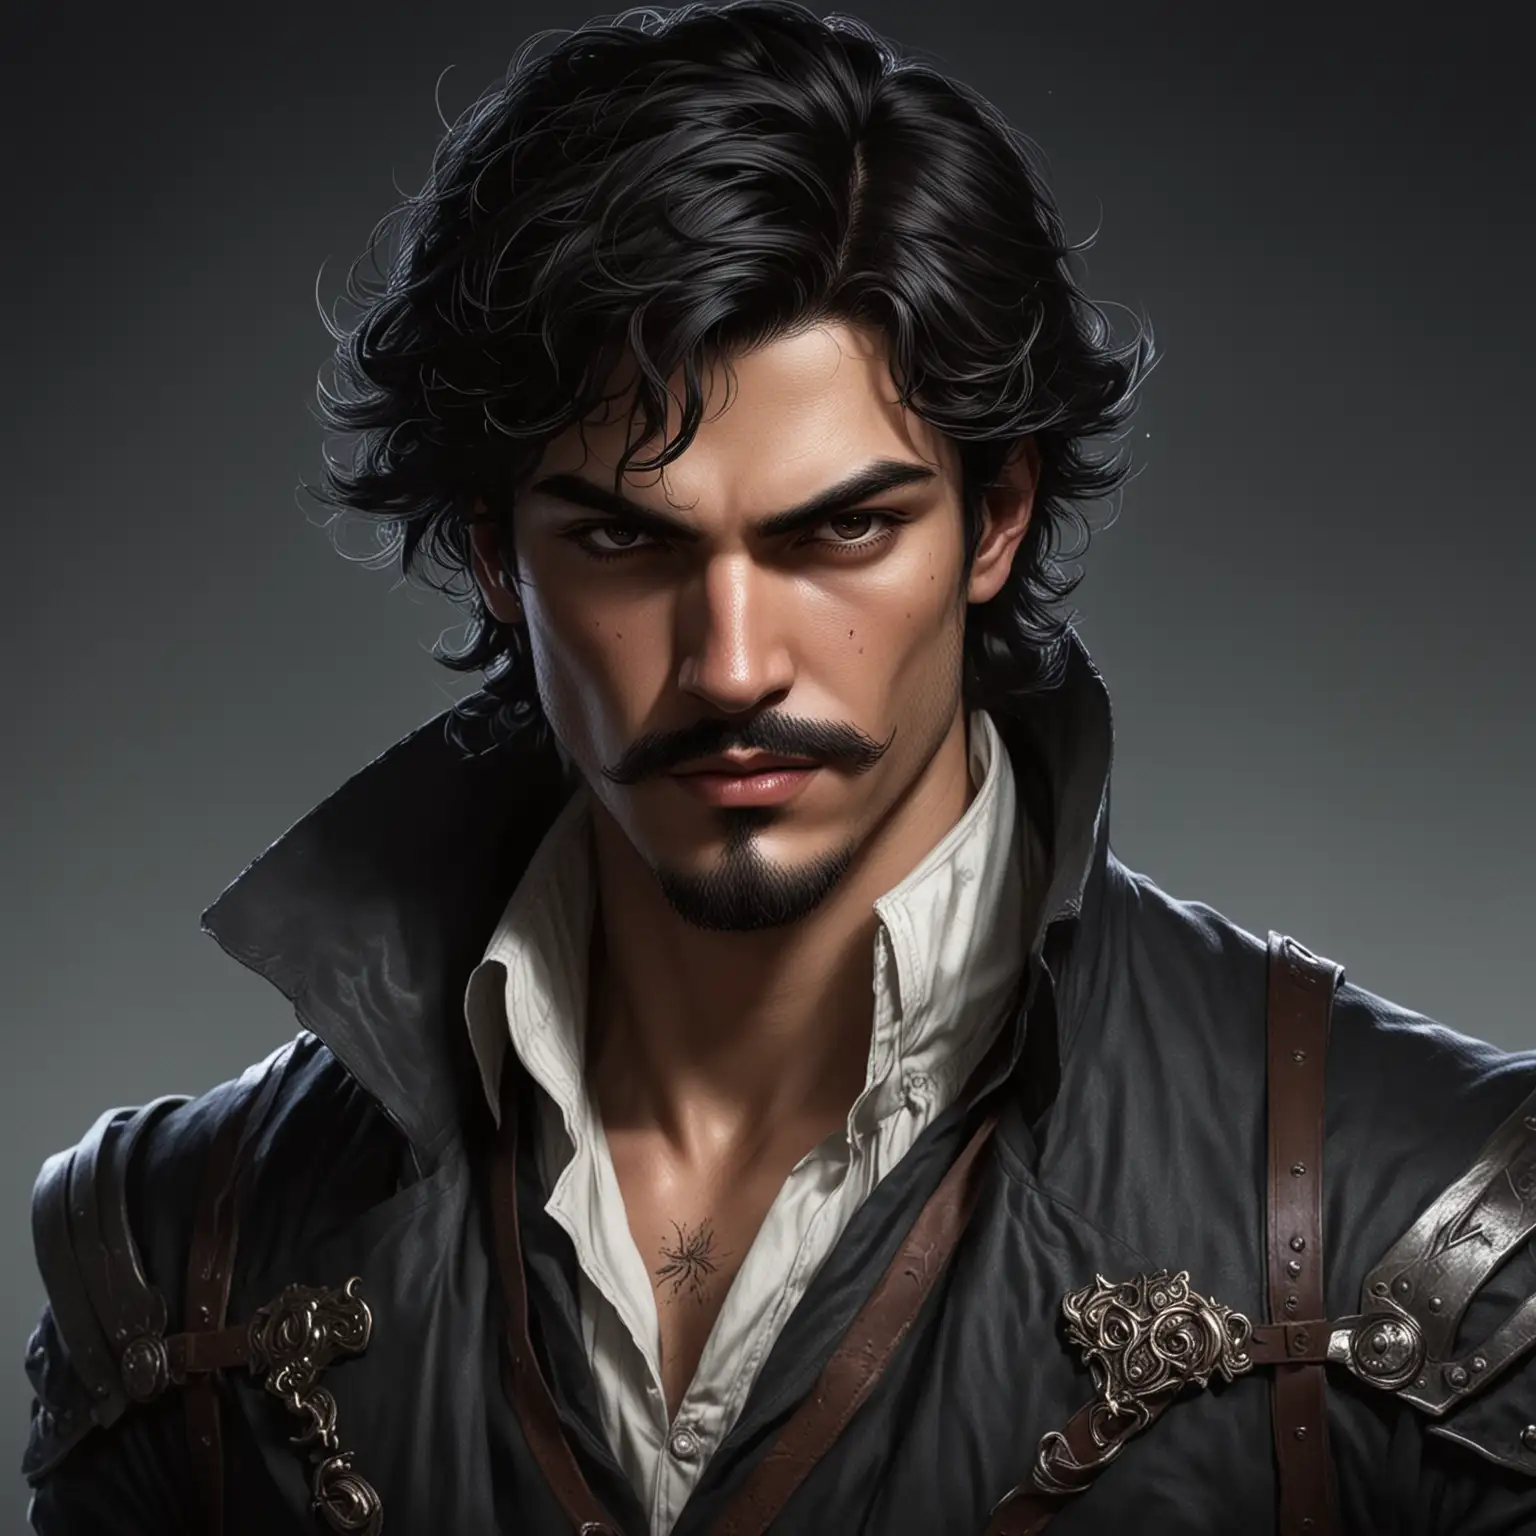 Intimidating Male Fantasy Rogue with Curled Mustache Artwork